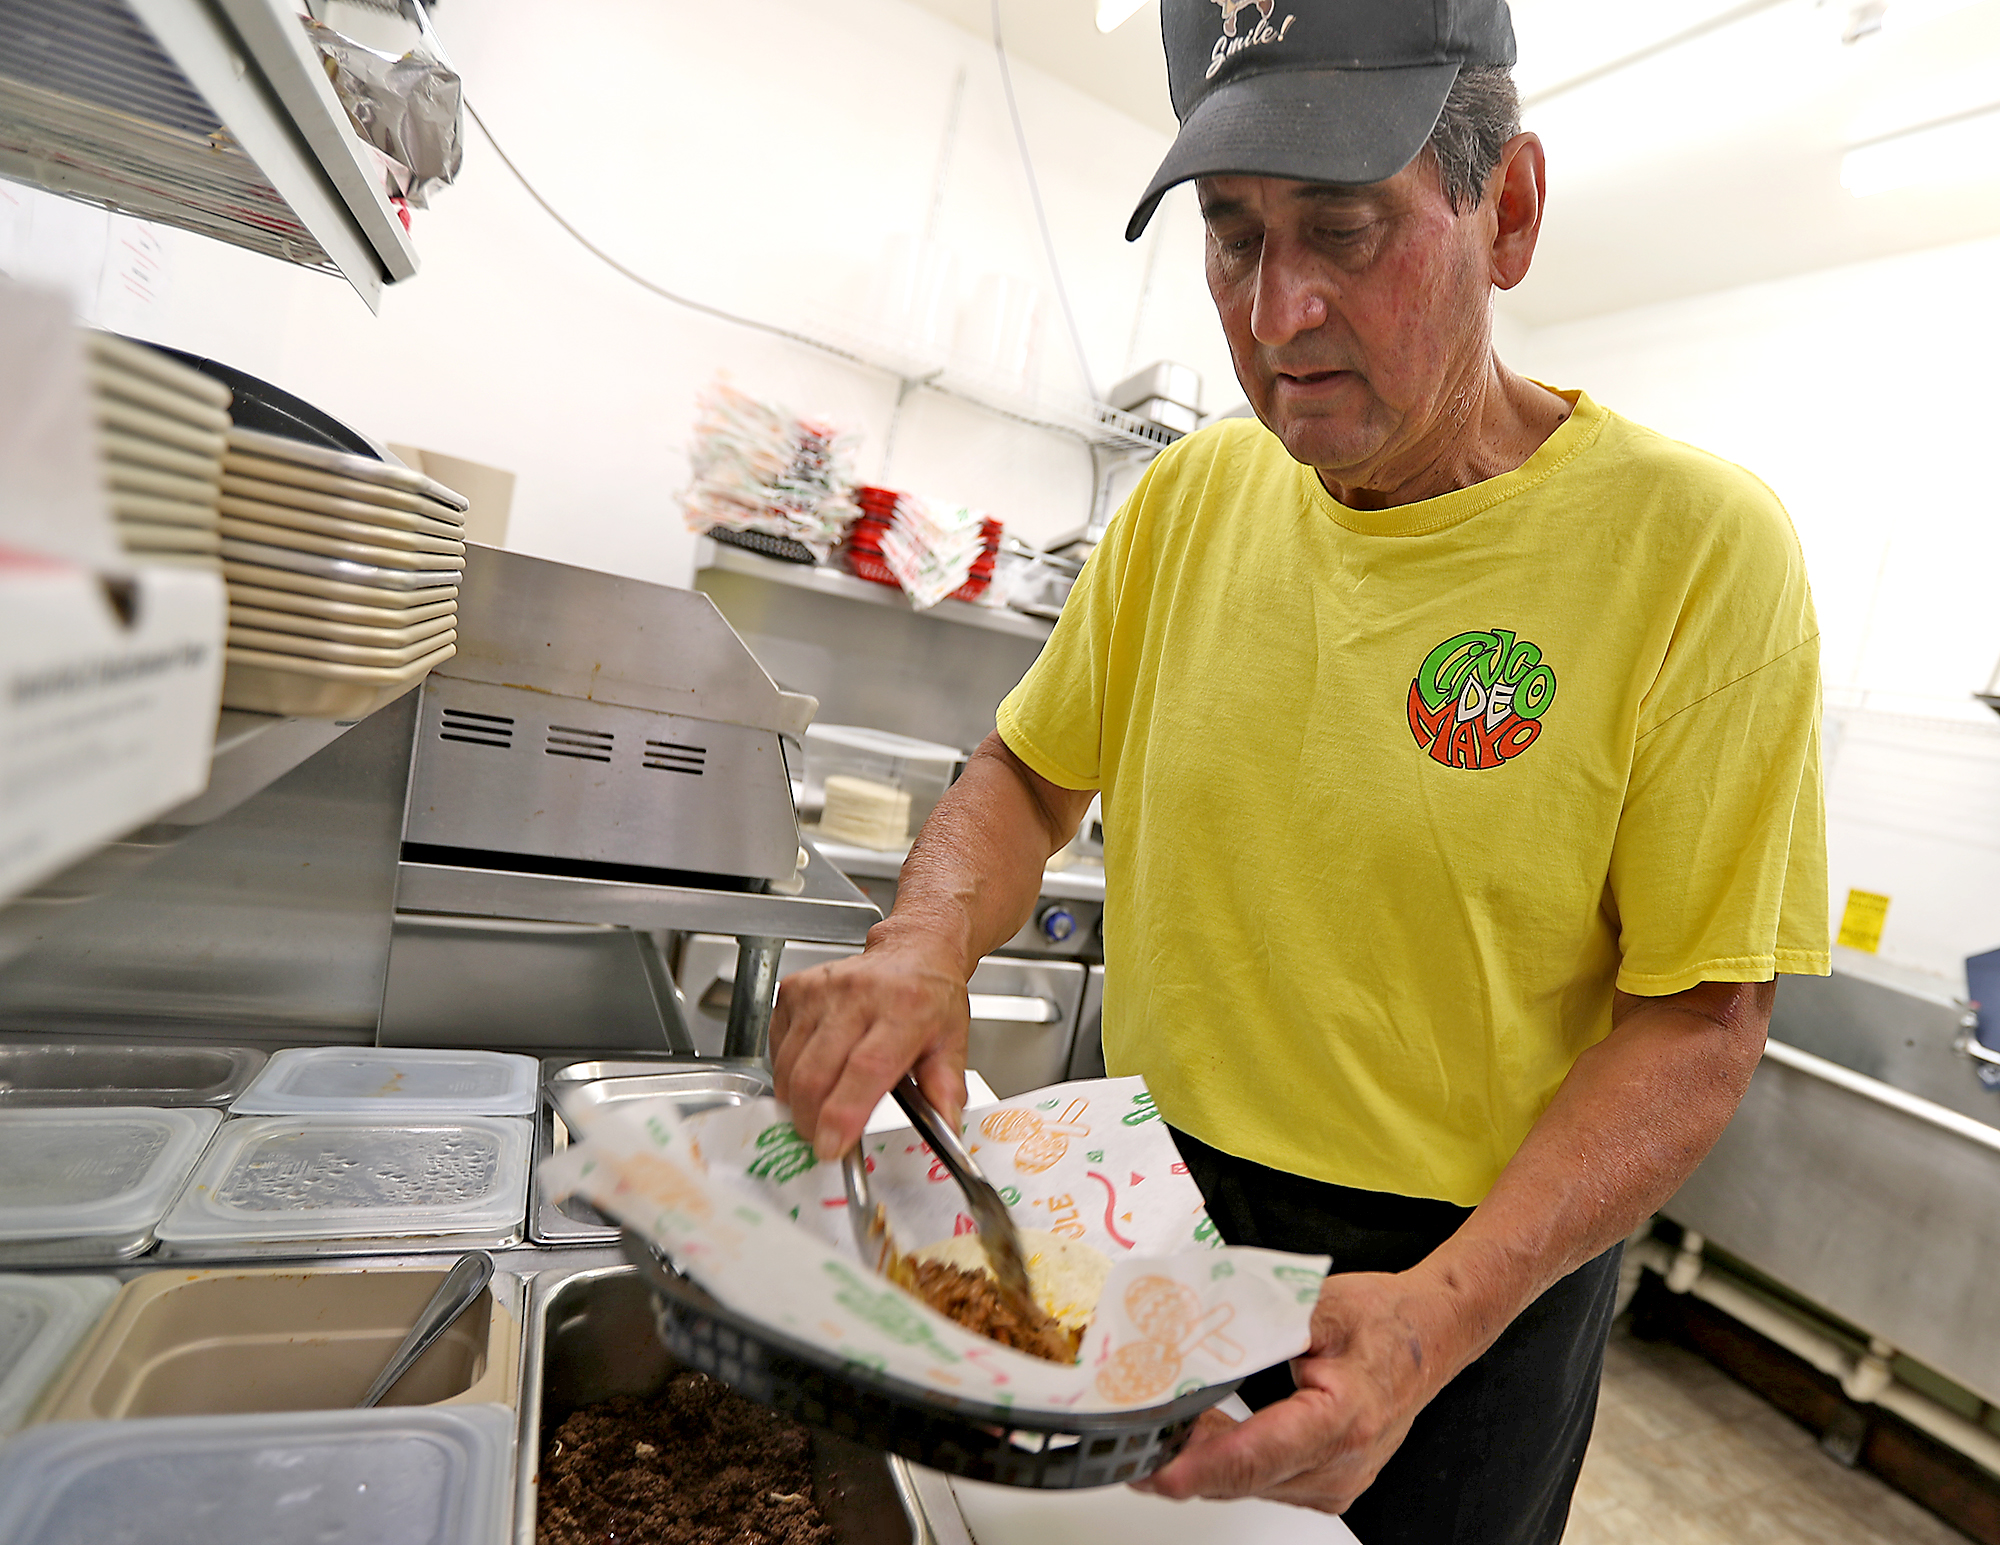 Felix Guerra, owner of Guerra's Krazy Taco, makes one of his famous tacos in the kitchen Wednesday, June 15, 2022. BILL LACKEY/STAFF